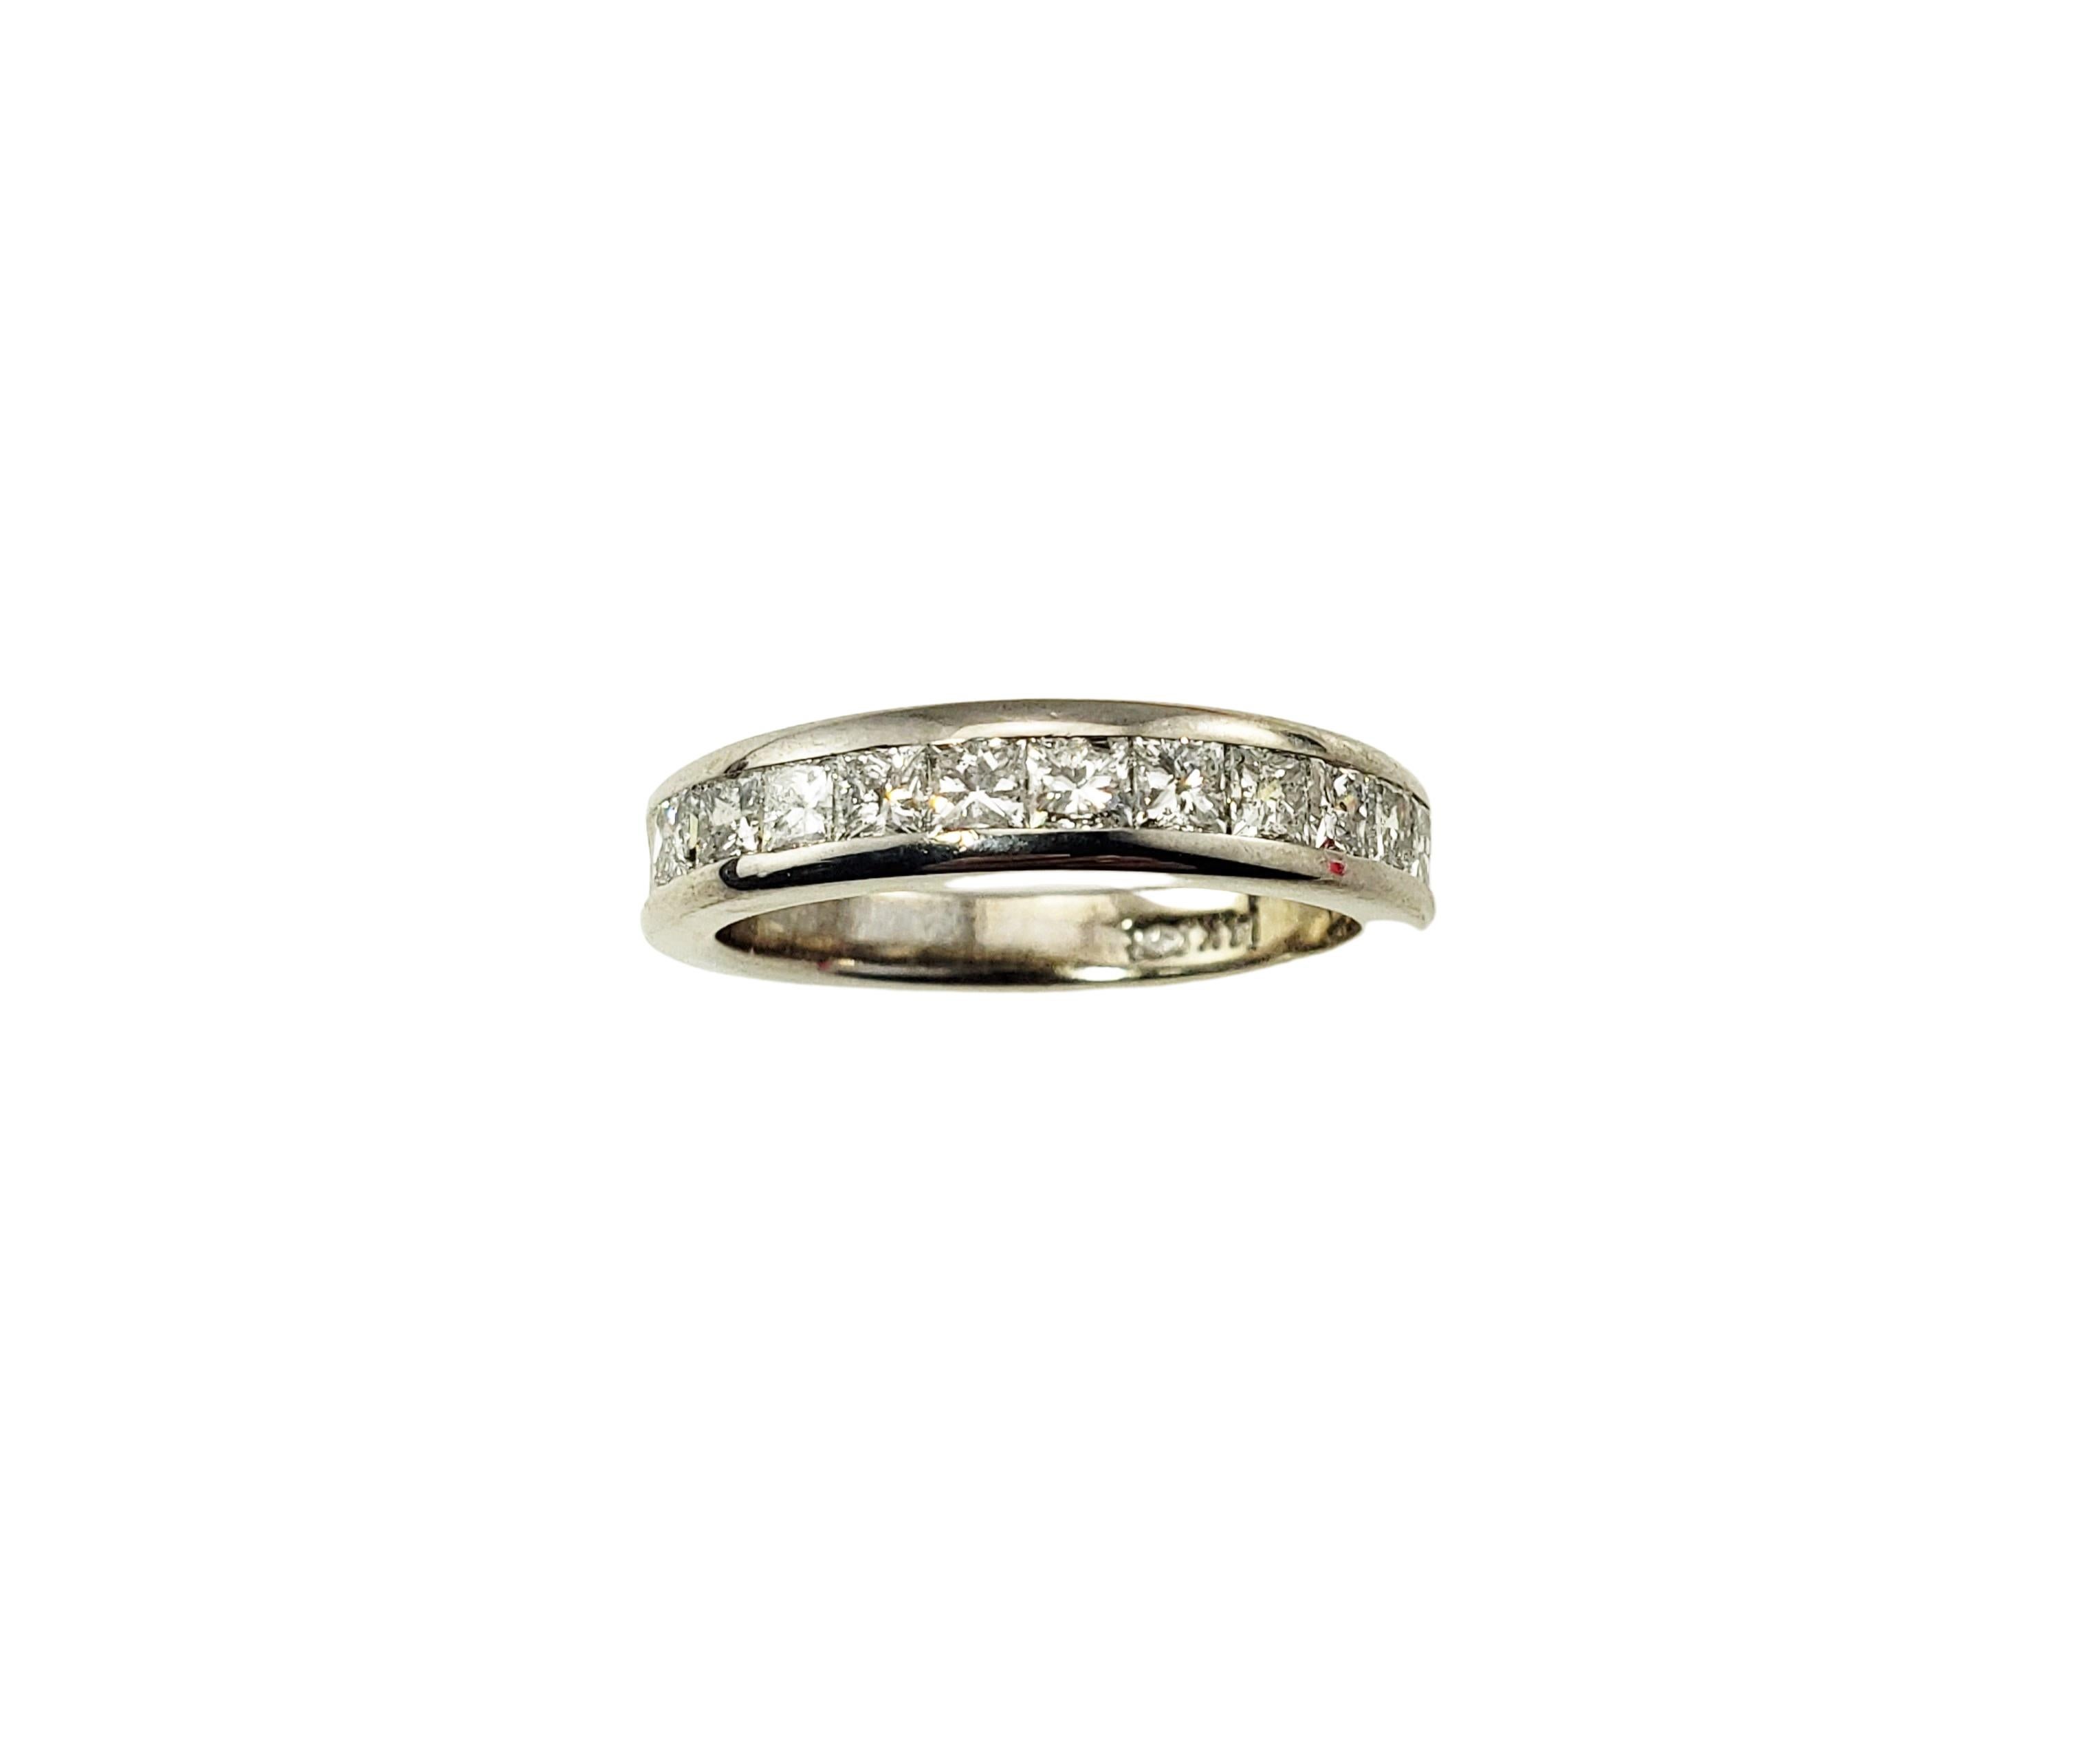 14 Karat White Gold Princess Cut Diamond Wedding Band Ring Size 7-

This sparkling band features 11 princess cut diamonds set in classic 14K white gold.  Width:  4 mm.  Shank:  3 mm.

Approximate total diamond weight:  .45 ct.

Diamond color: